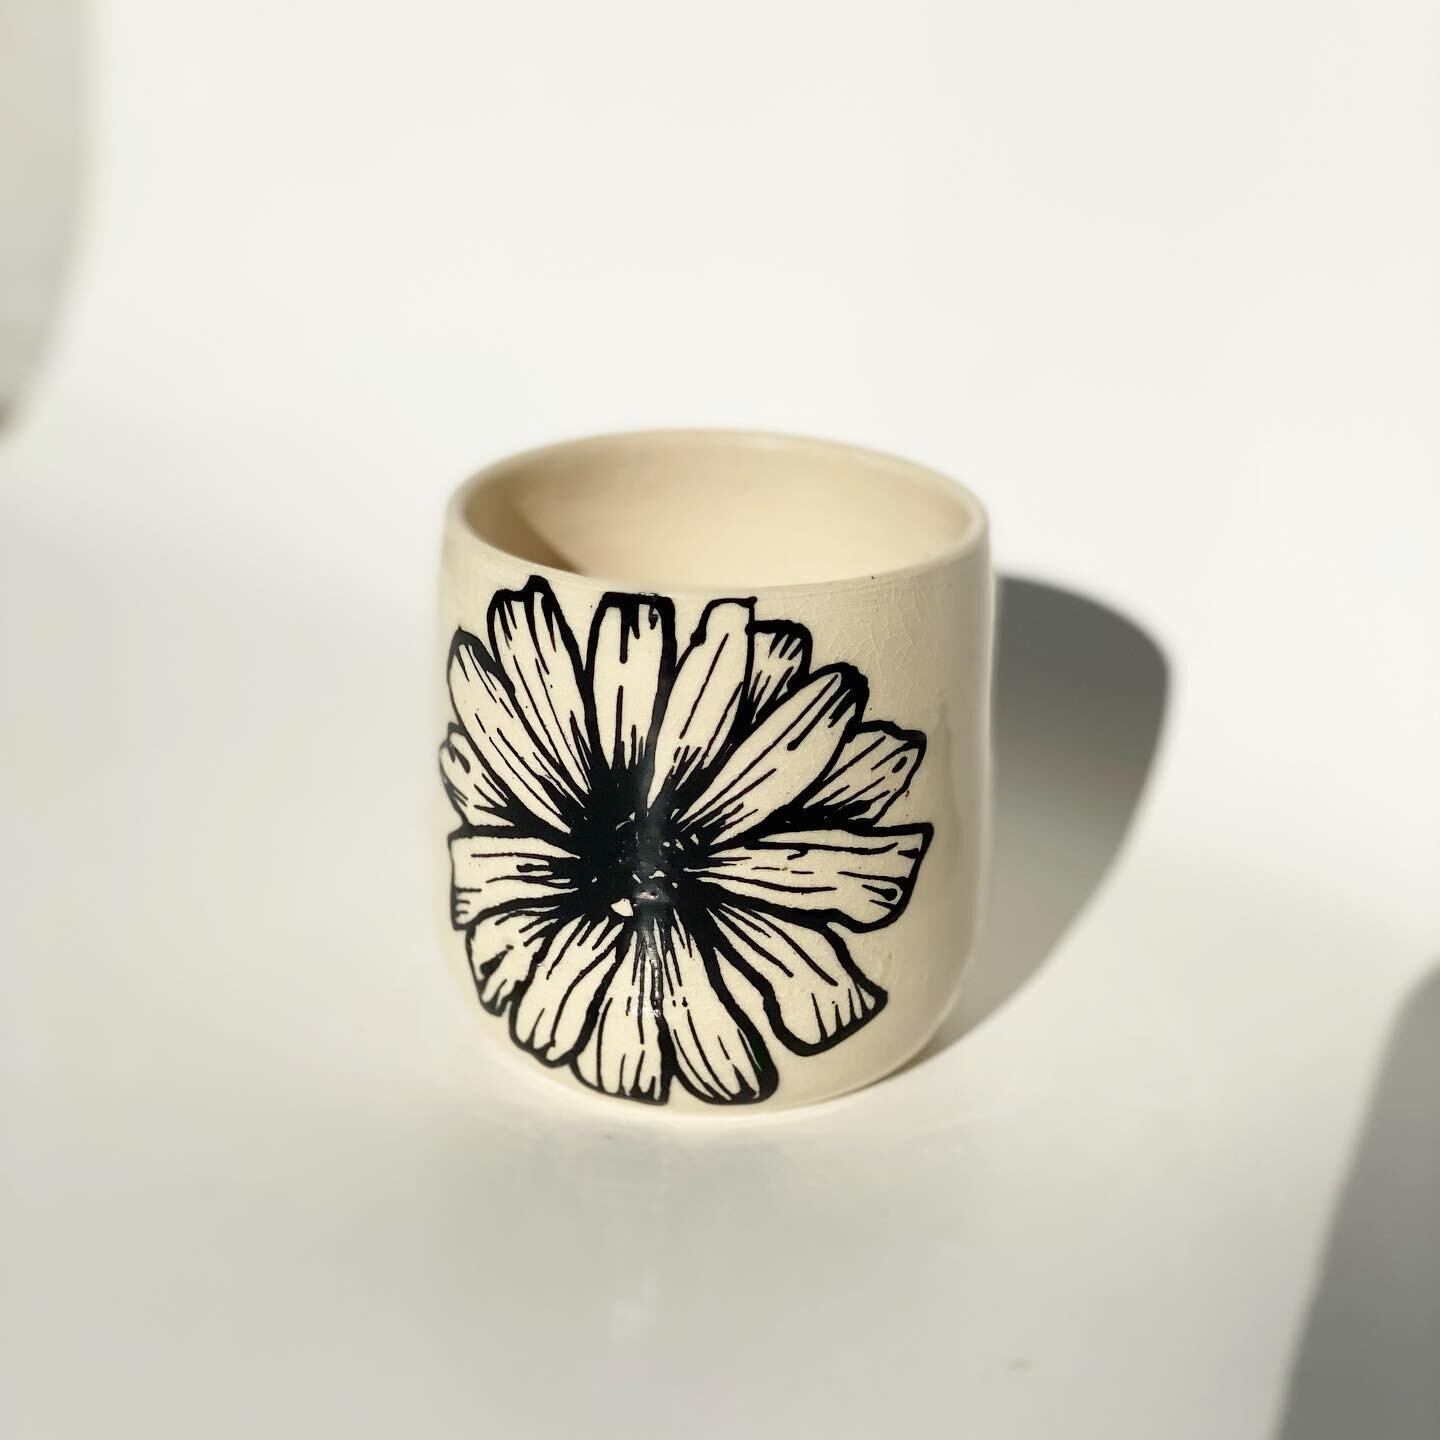 patiently waiting for Friday to be here to sip wine out of this beaut 😍
.
.
.
#clayallday #clayeverydamnday #wheelthrownpottery #winewednesday #wine #tumbler #tumblersofinstagram #mug #coffeeorwine #thatsdarling #floral #floraldesign #mugsofinstagra